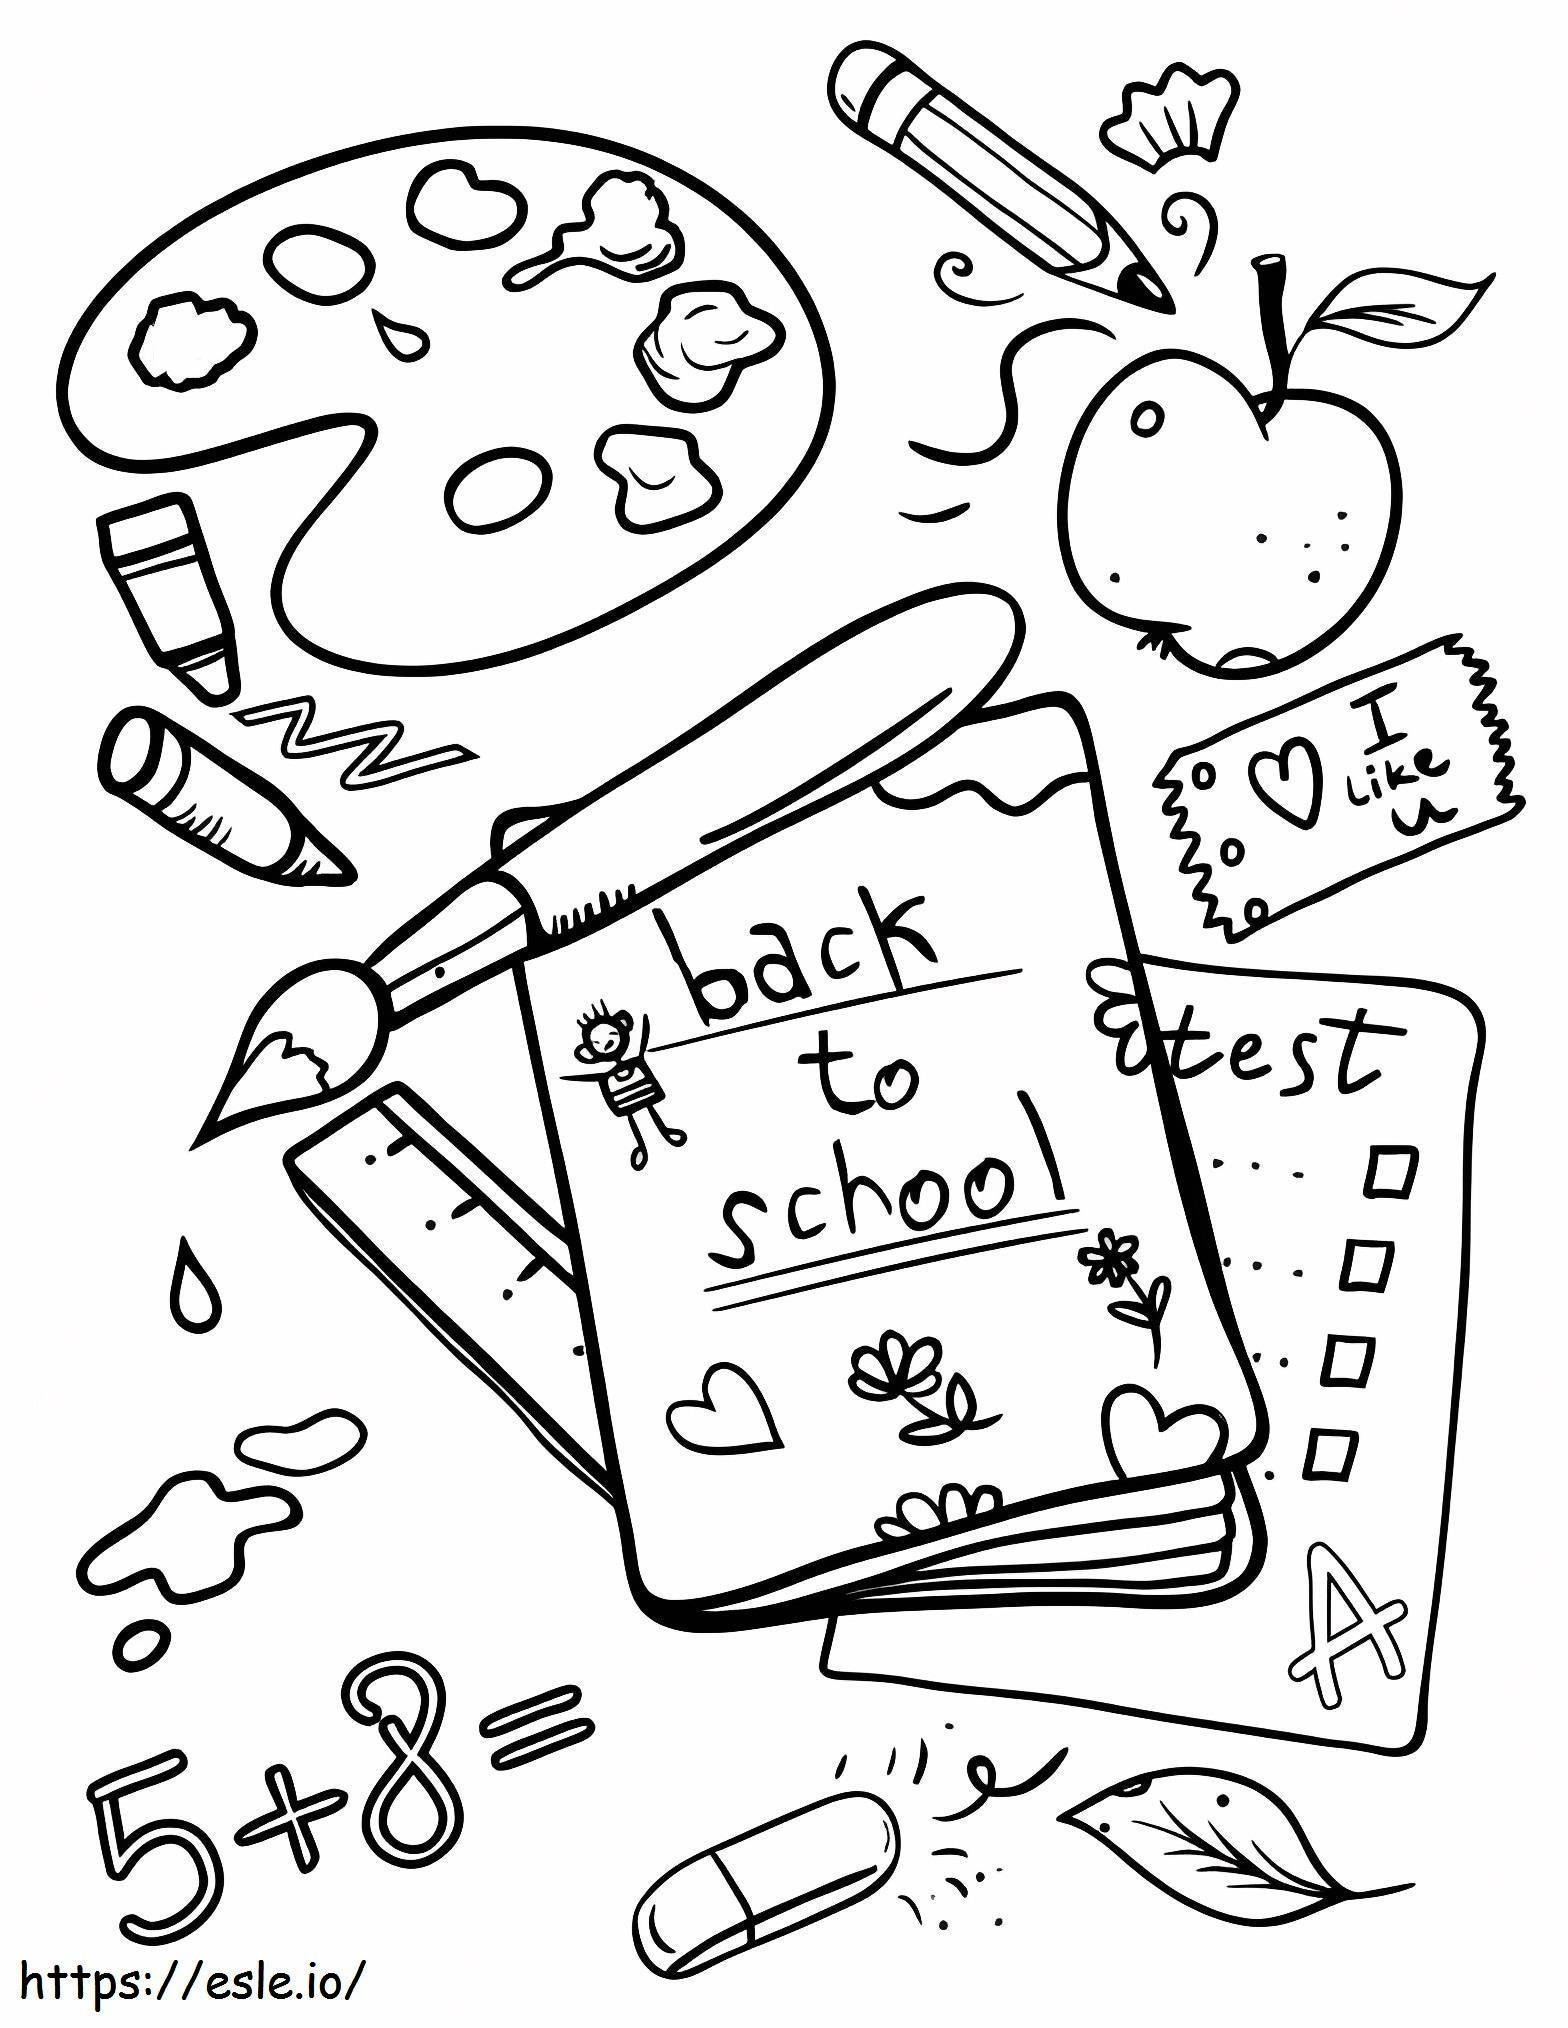 Normal Return To School coloring page